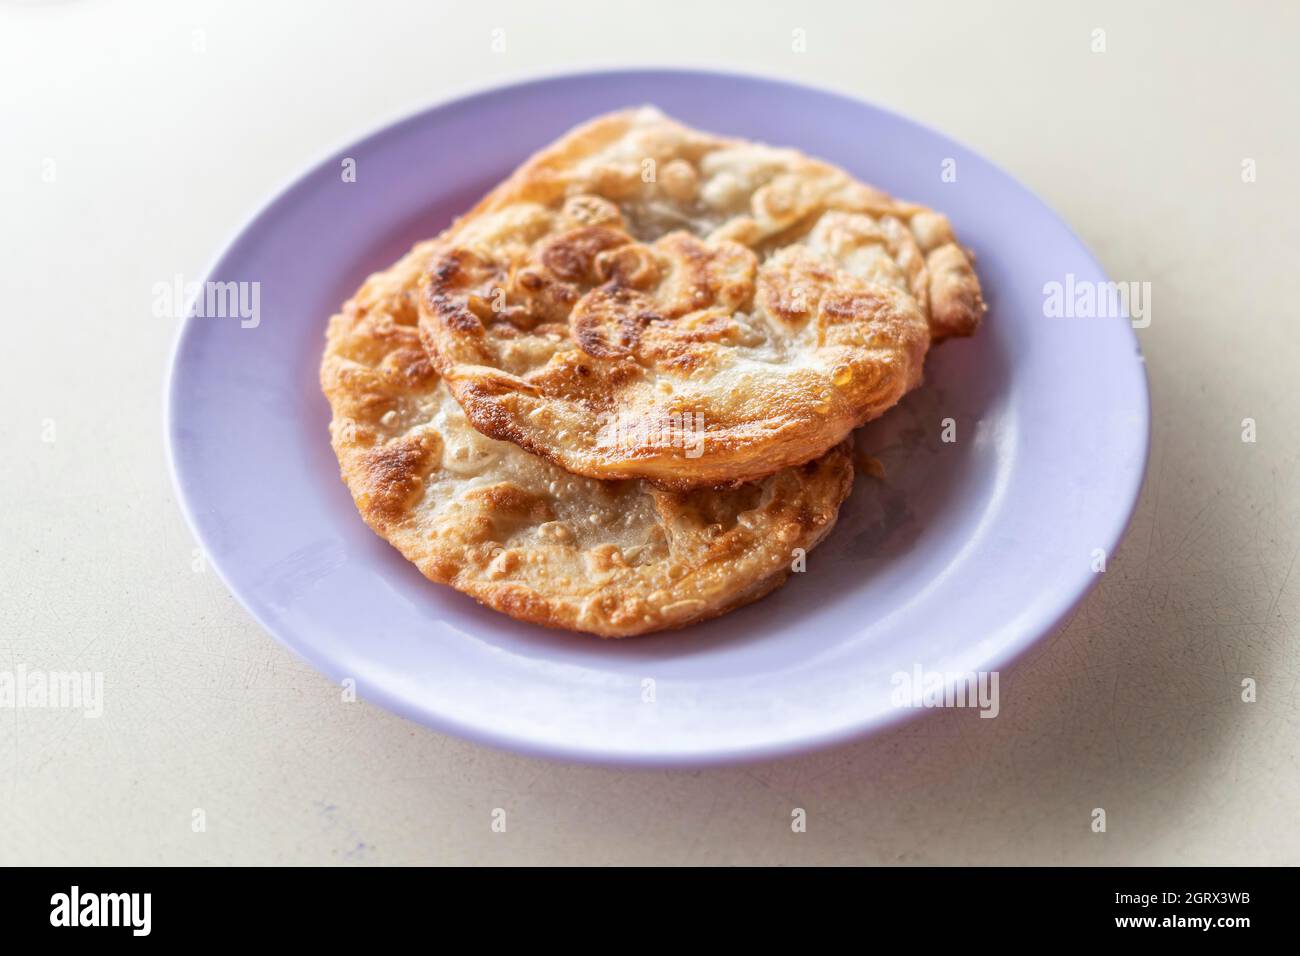 High Angle View Of Breakfast Flatbread Served On Table Stock Photo